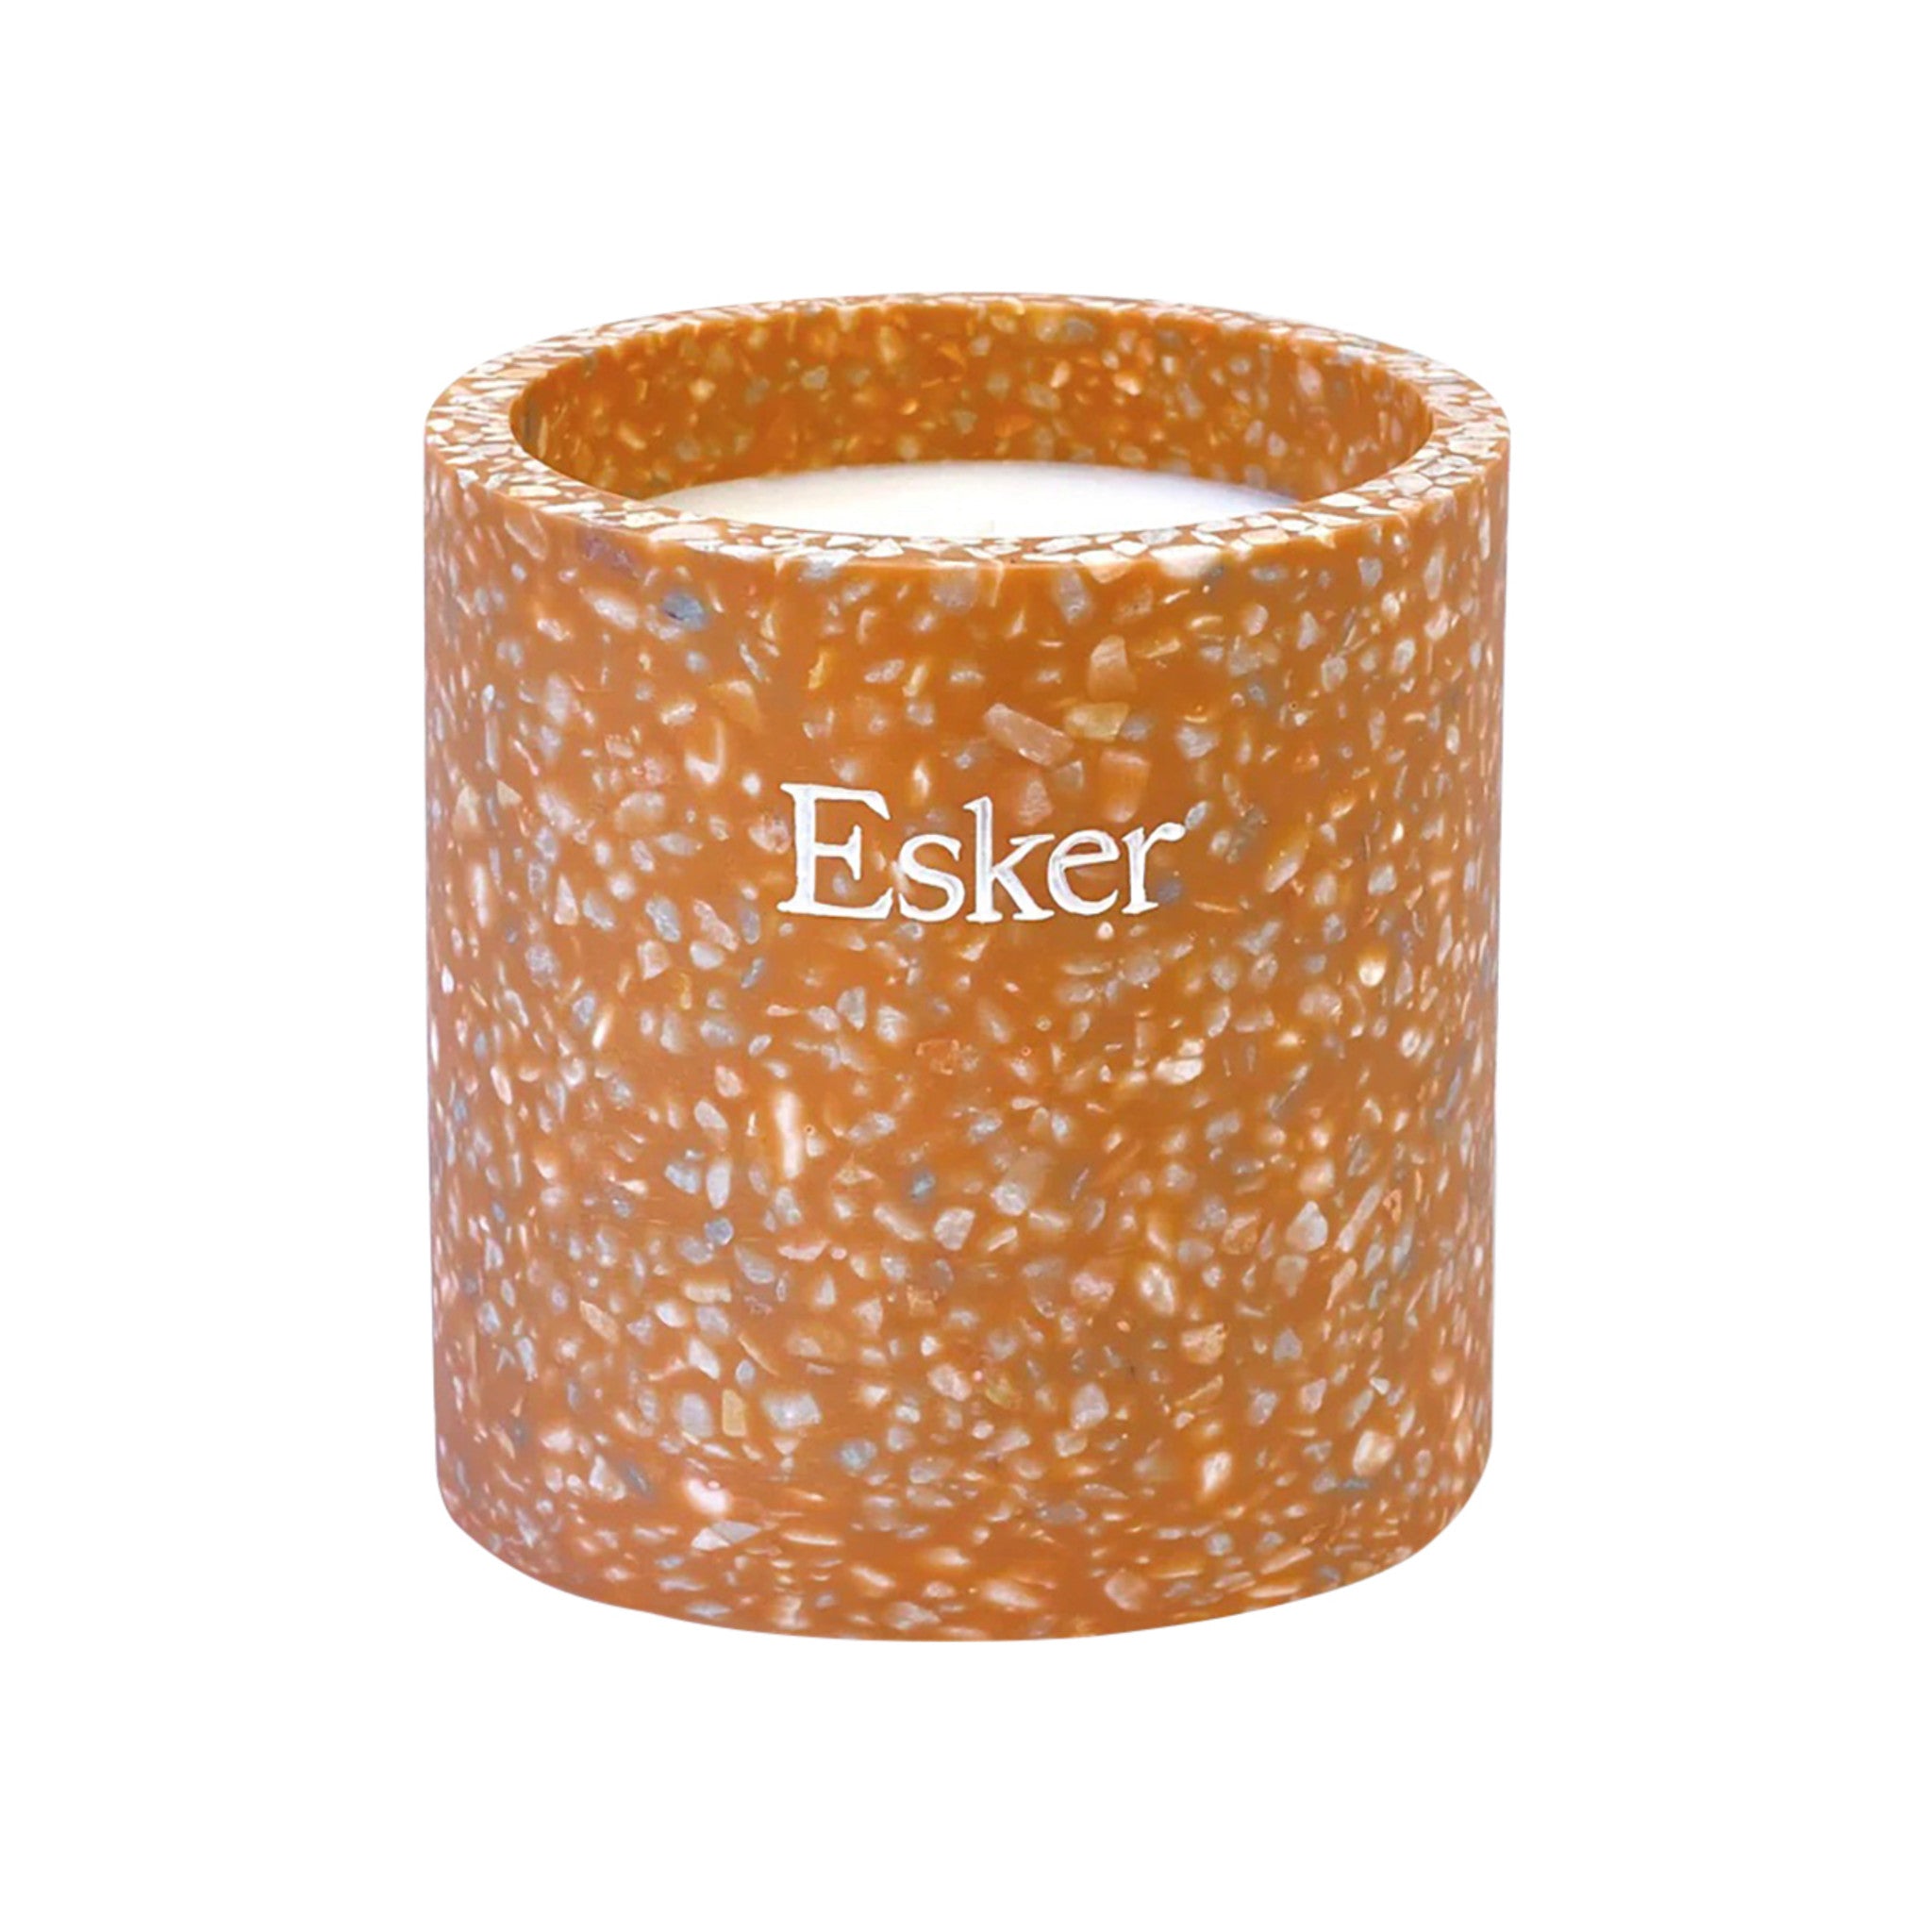 Esker Terracotta Plantable Candle open container image.